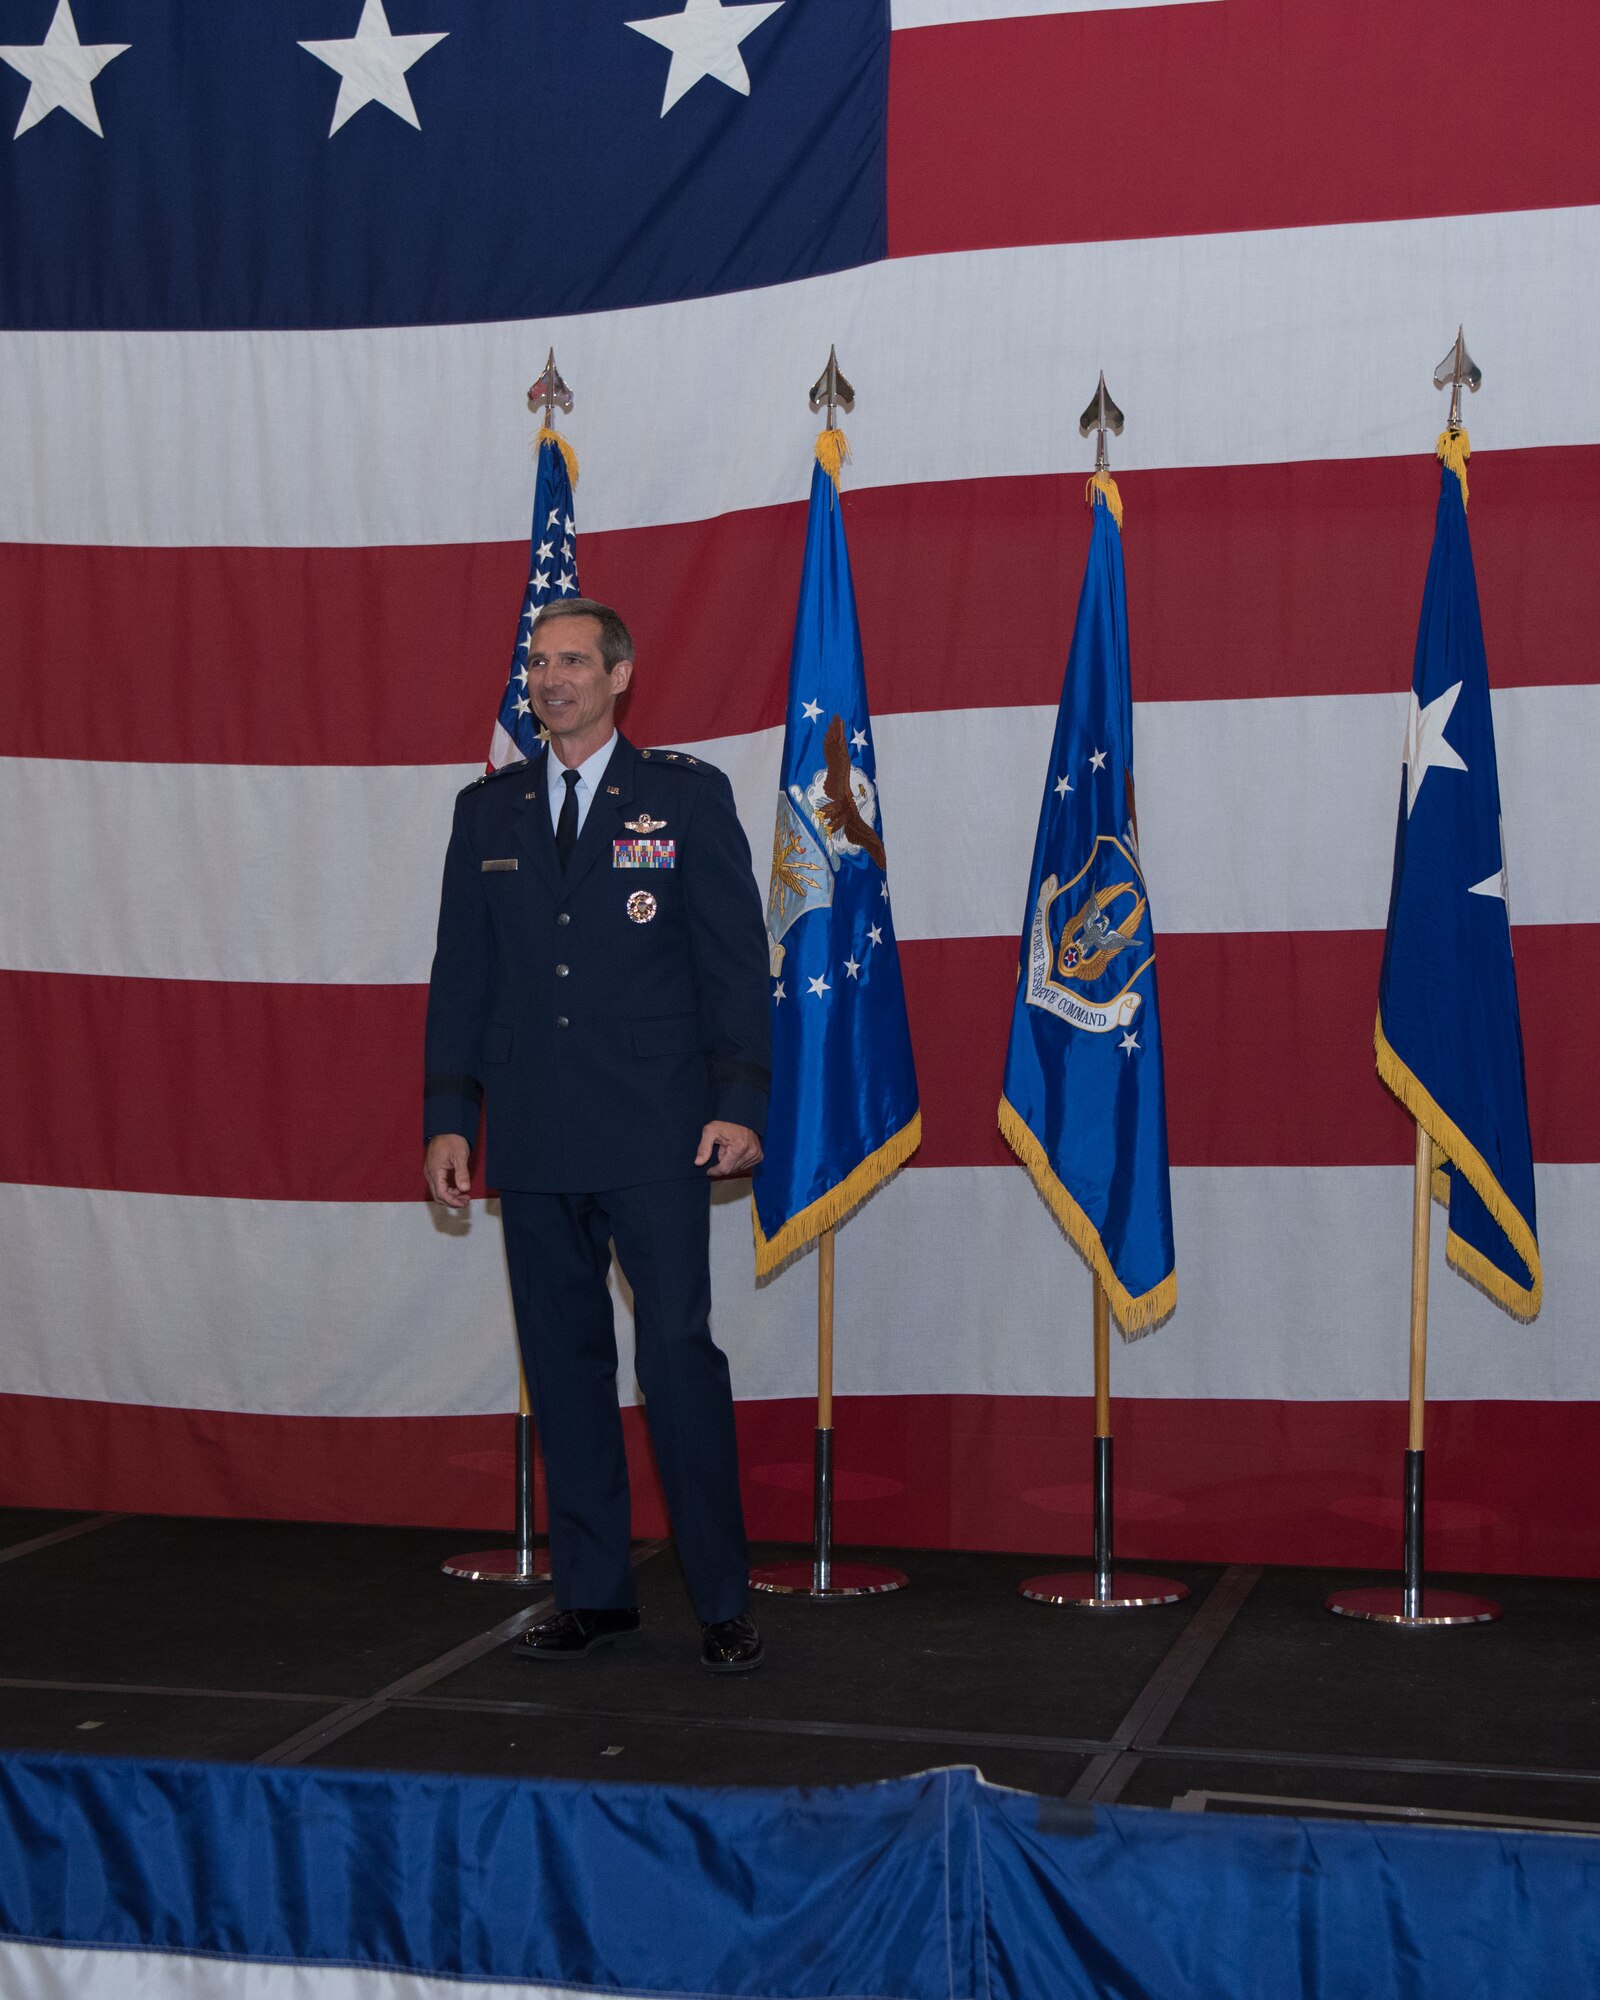 Maj. Gen. Bryan Radliff addressed the crowd for the first time as the Commander, Tenth Air Force.